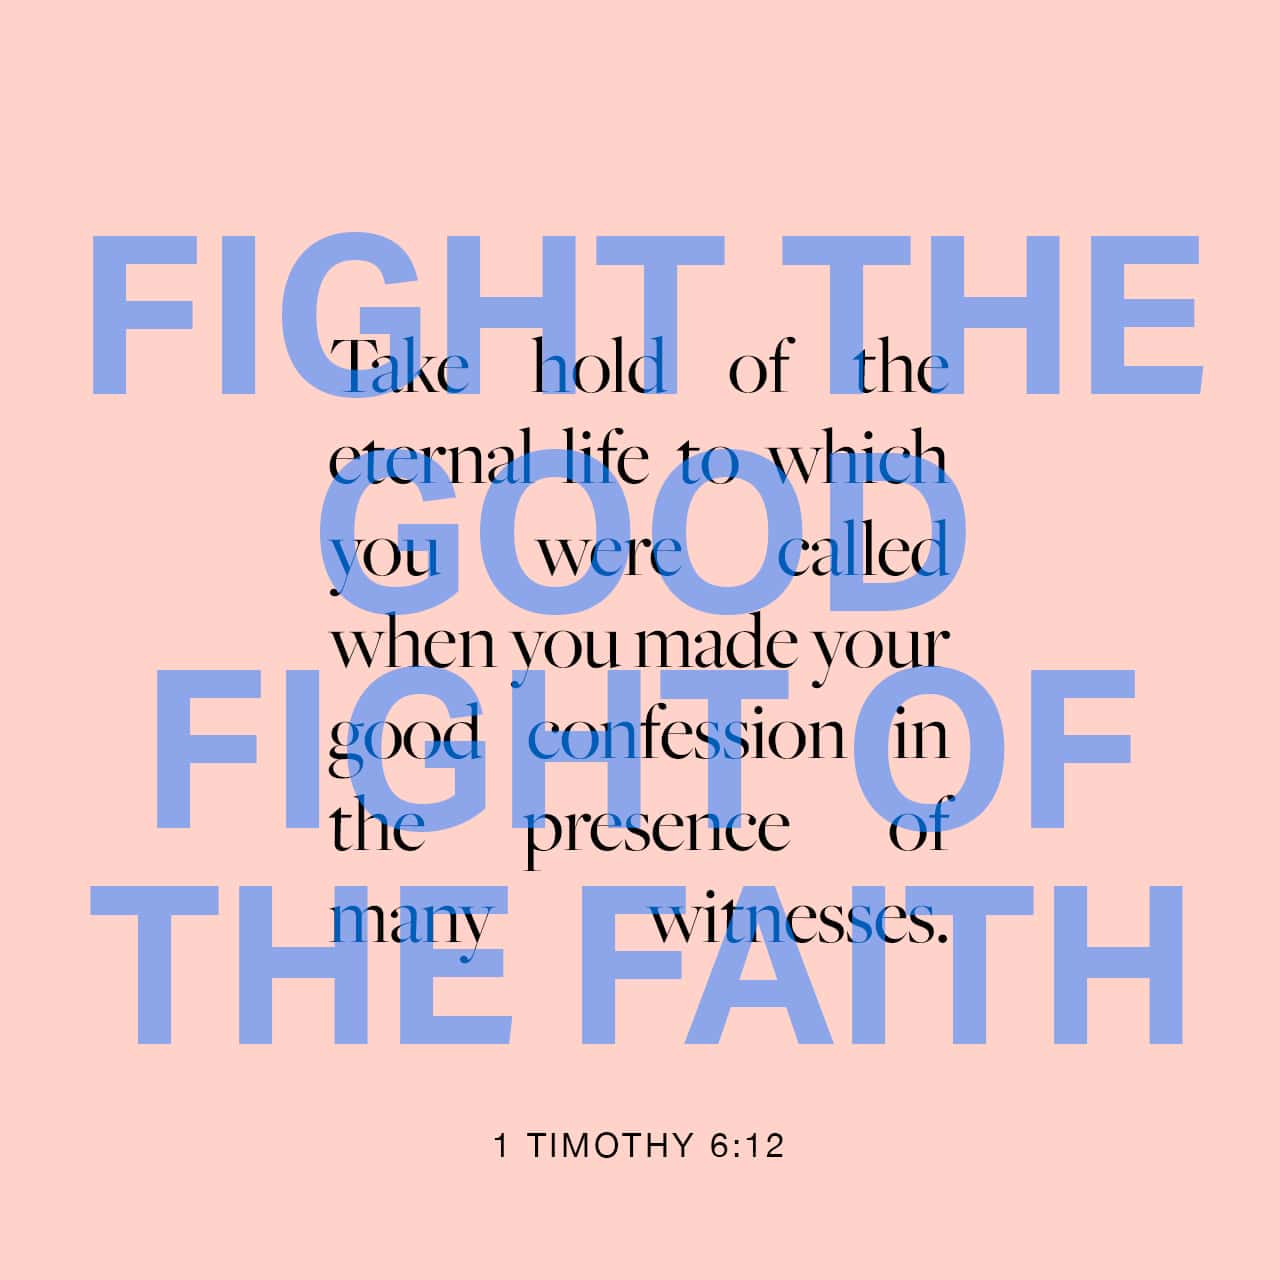 1 Timothy 6:11-12 But of God, flee from all this, and pursue righteousness, godliness, faith, love, endurance and gentleness. Fight the fight of the faith. Take hold of the